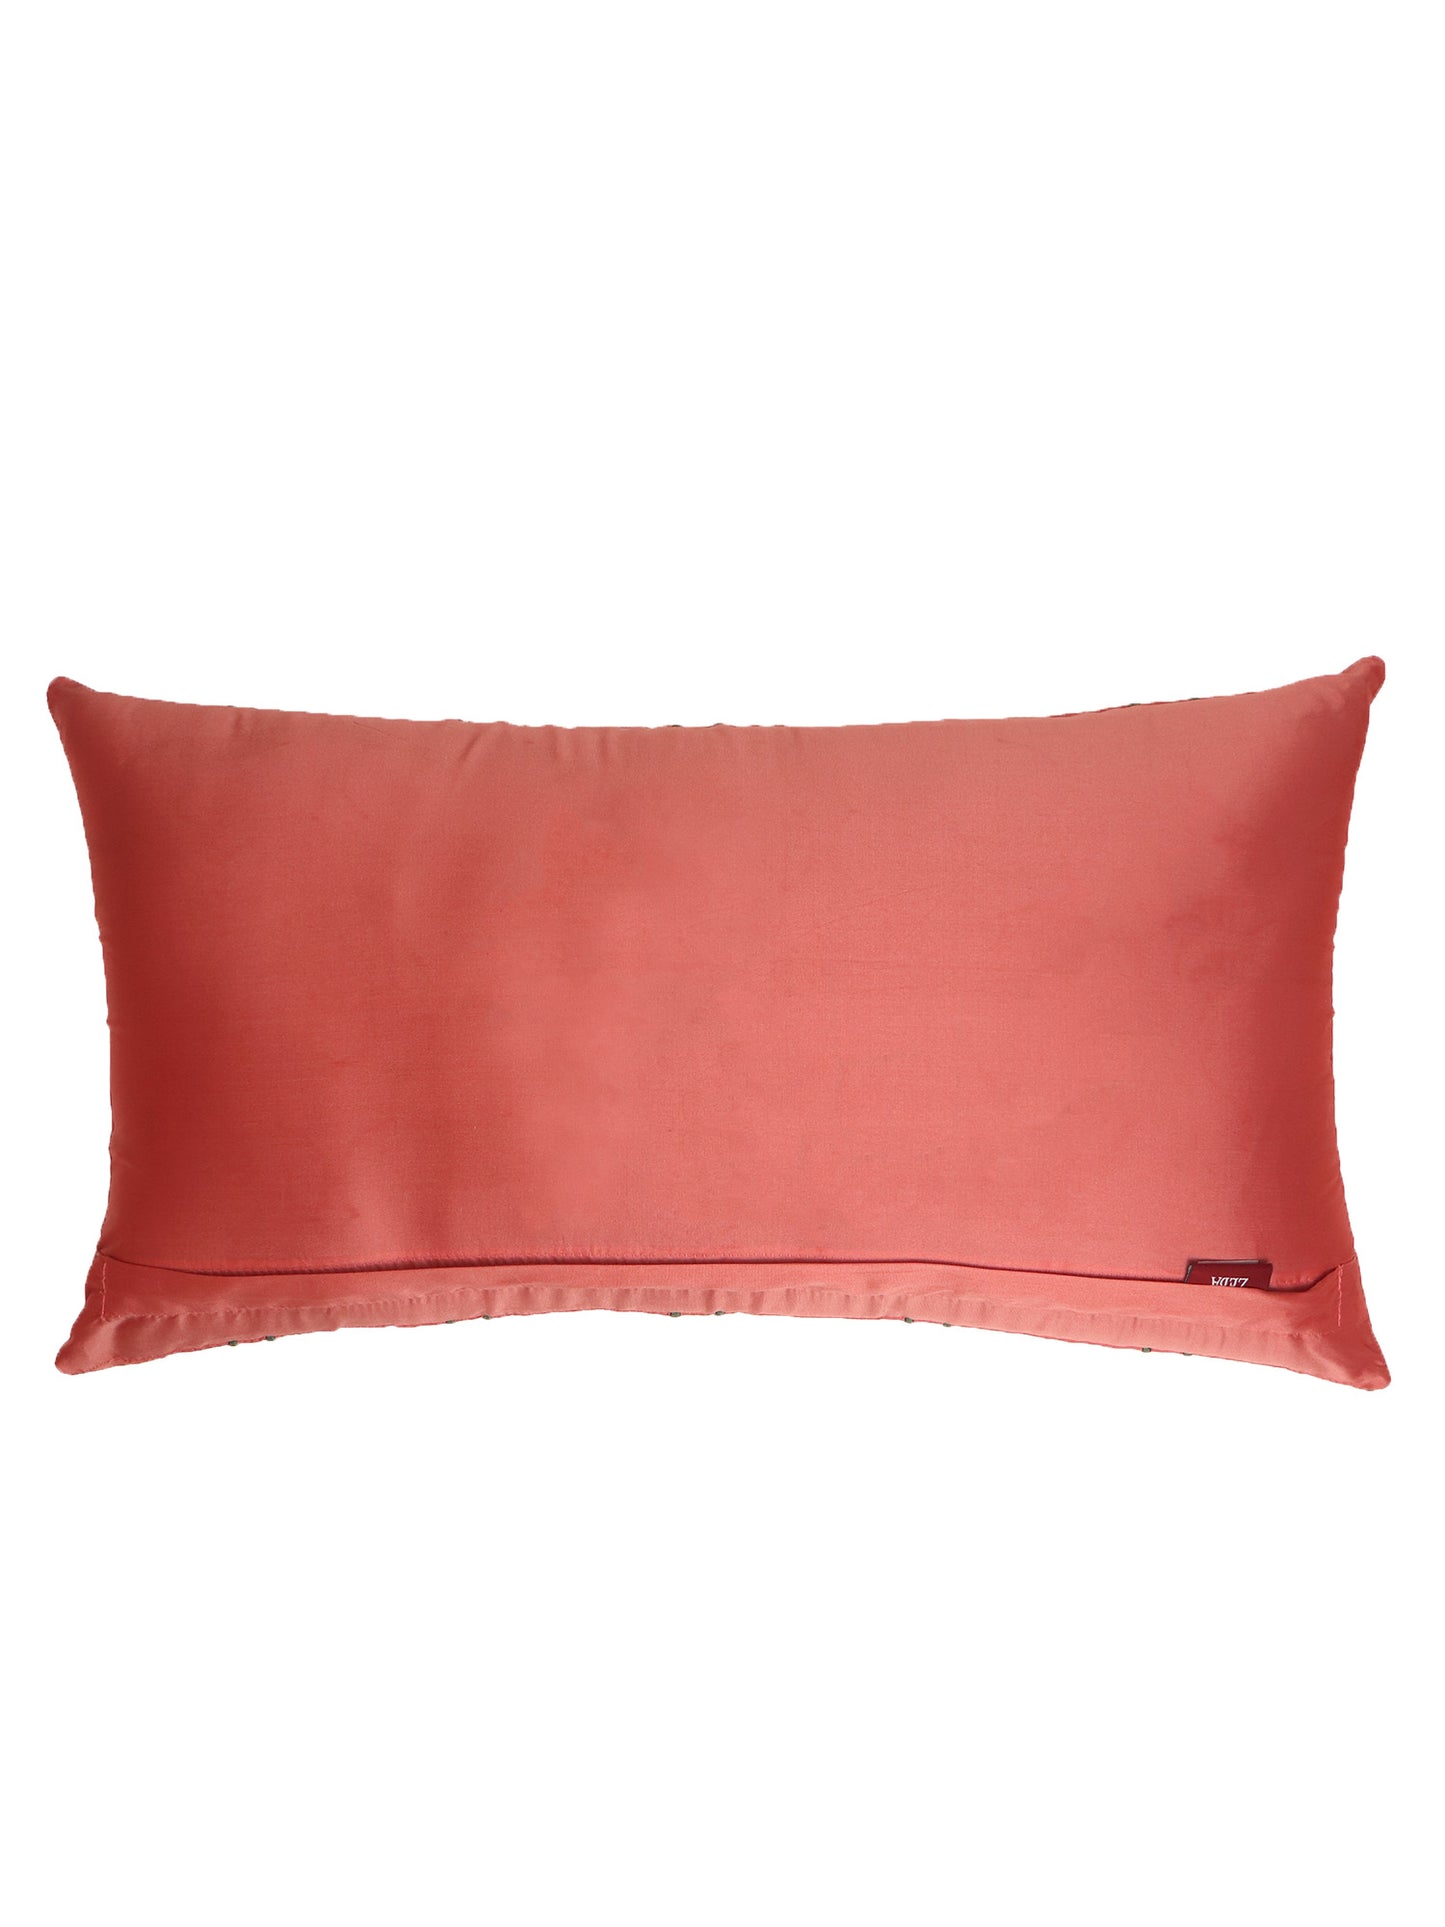 Embroidered Cushion Cover Polyester Blend Light Pink - 12" x 22"